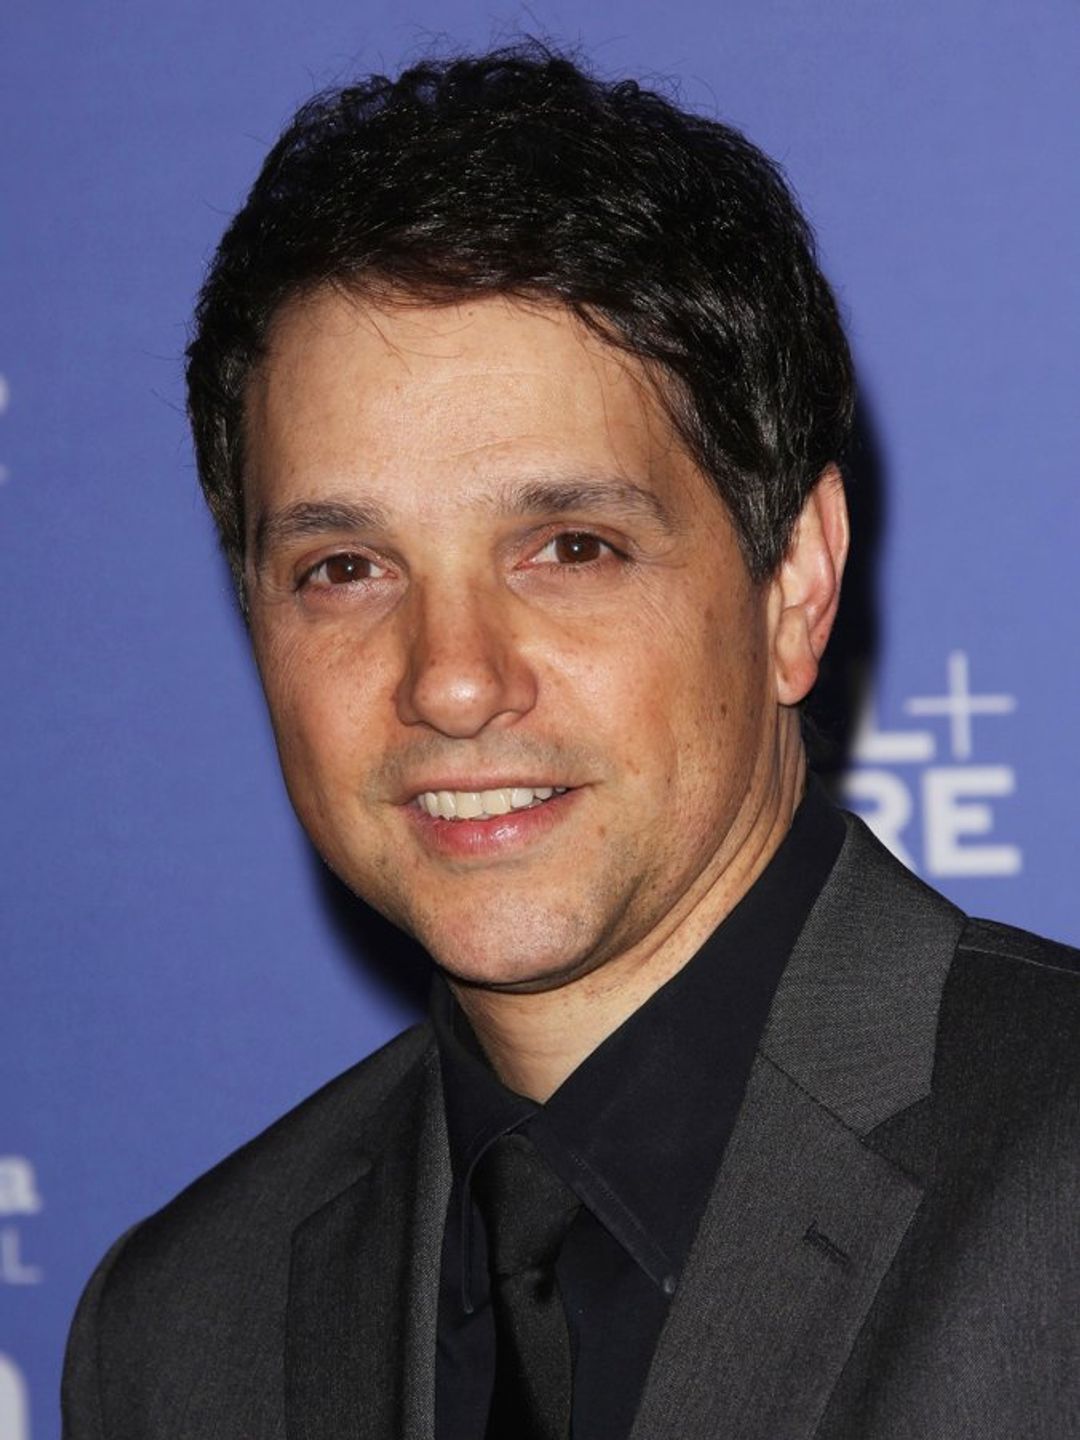 Ralph Macchio who is his father